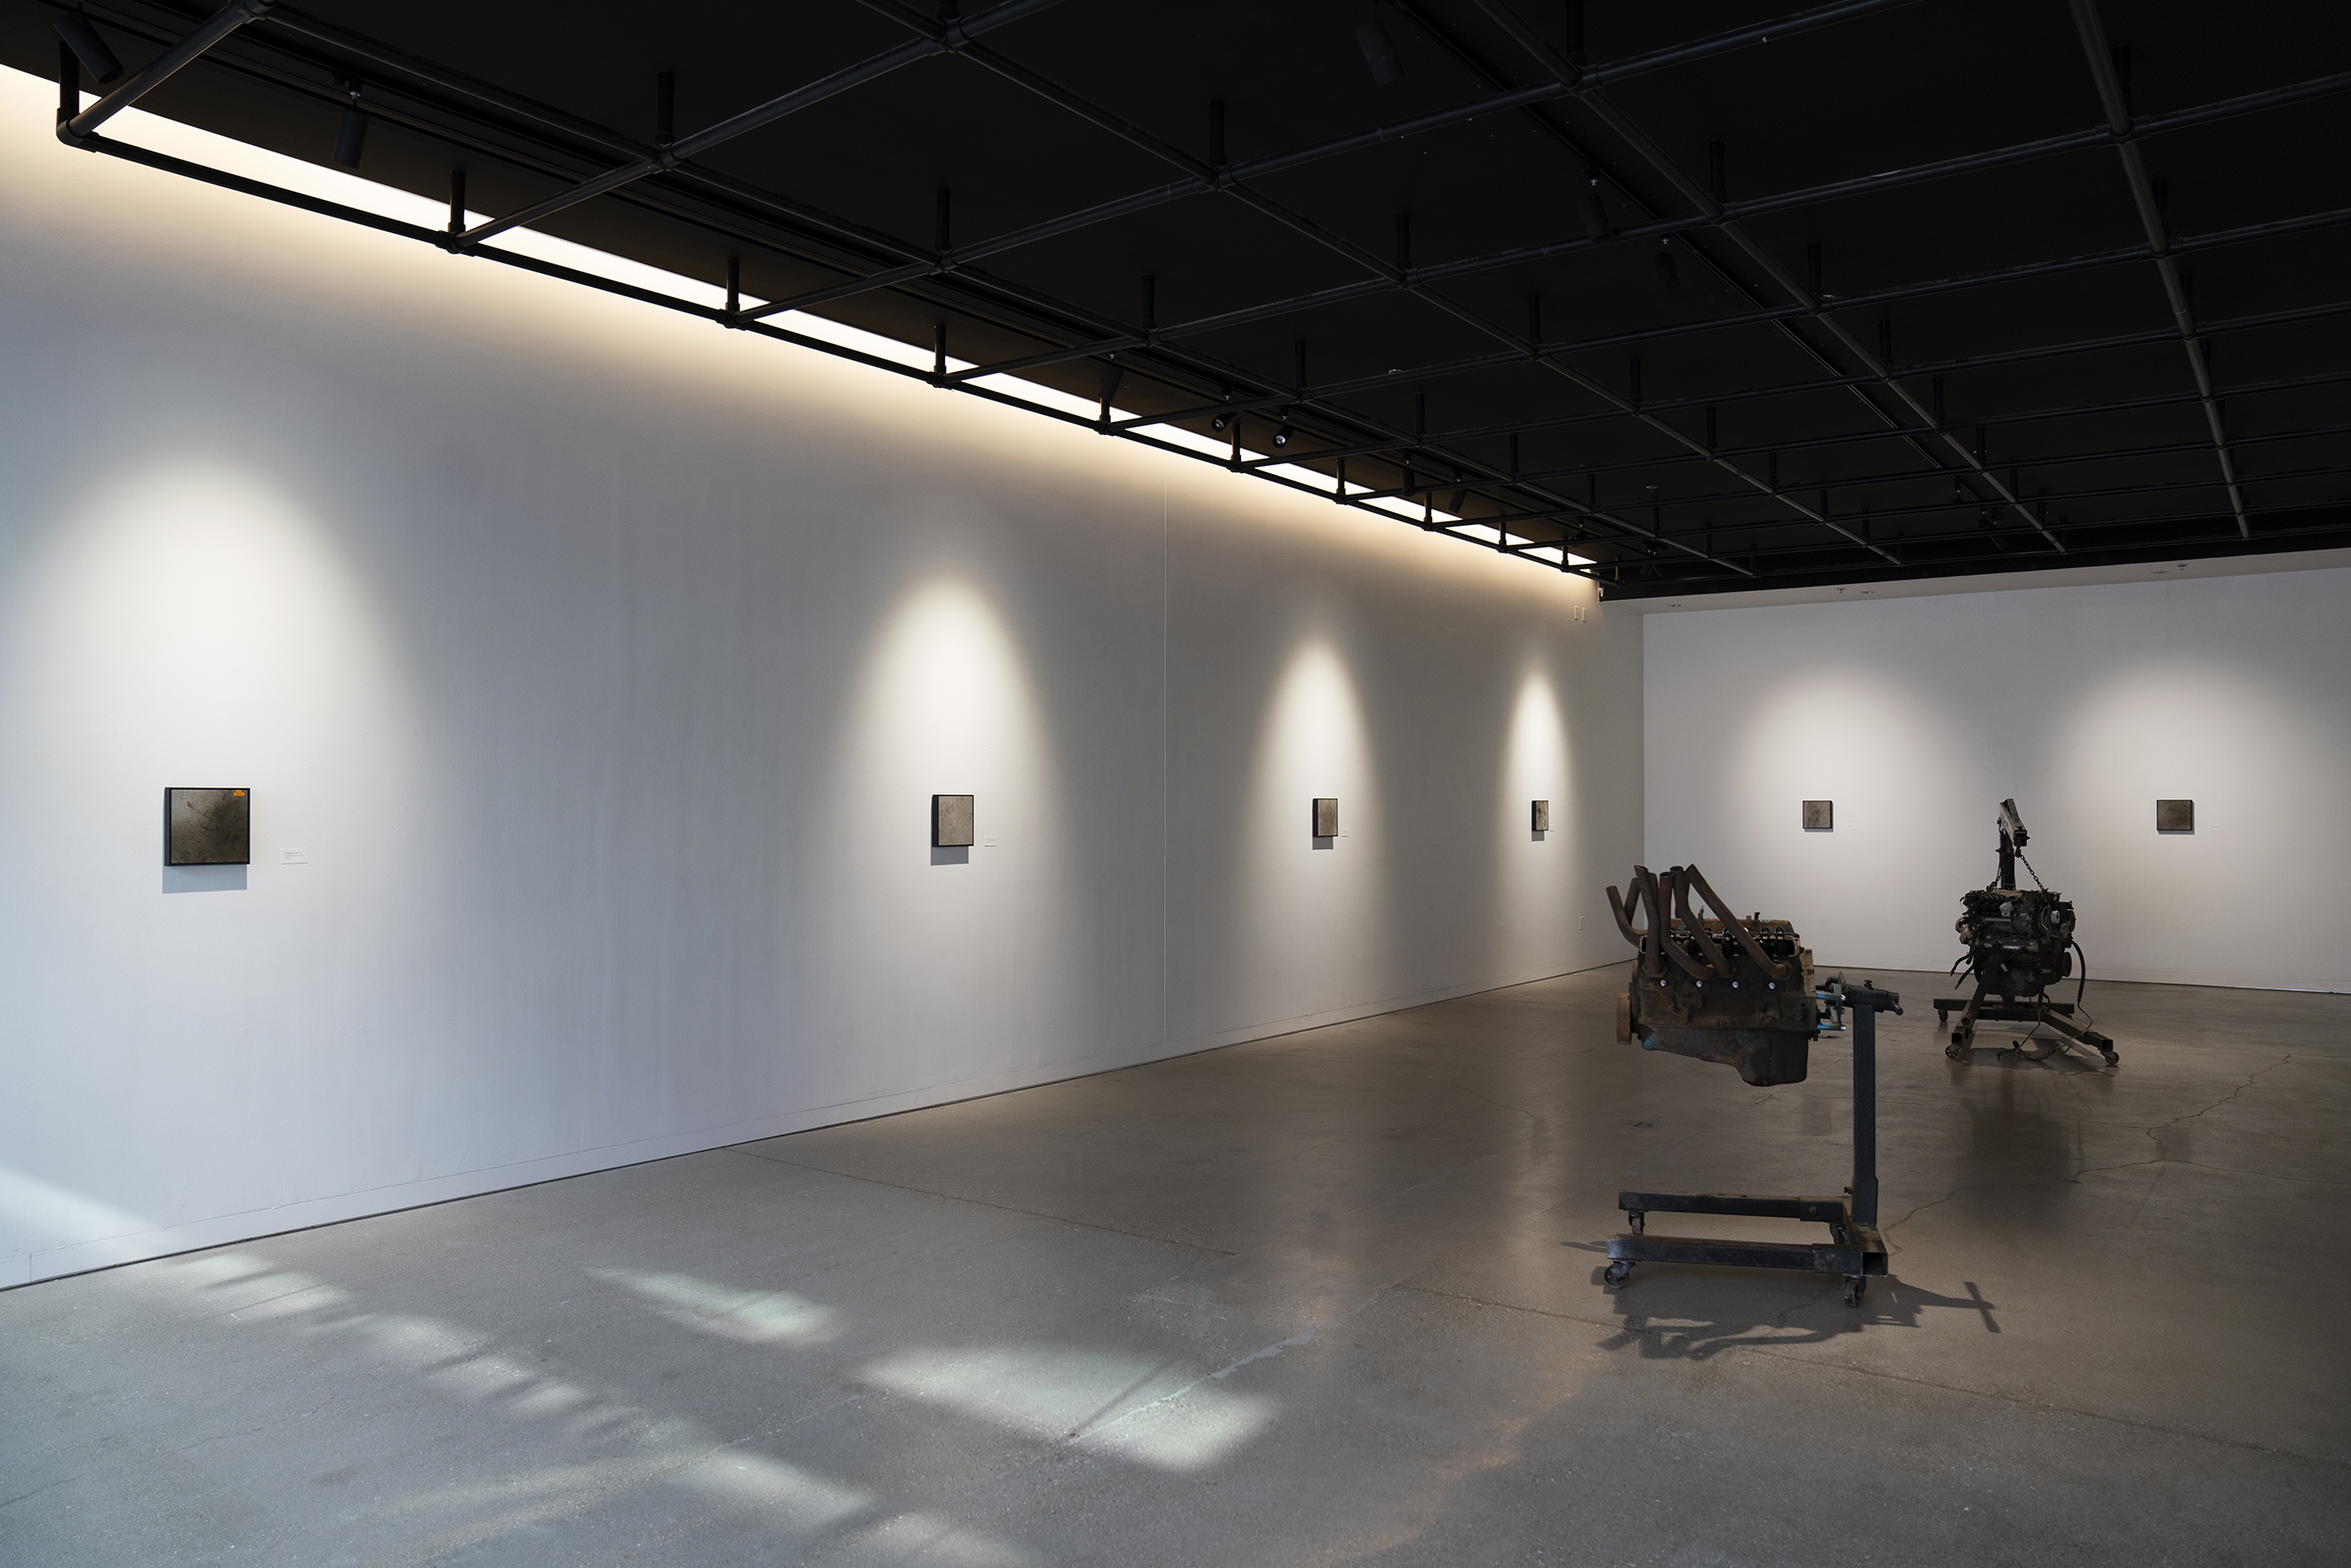 Installation view of Blood, Sweat, and Oil Master of Fine Arts Exhibition by Eric Hazeltine at the Art Lofts Gallery, University of Wisconsin-Madison.